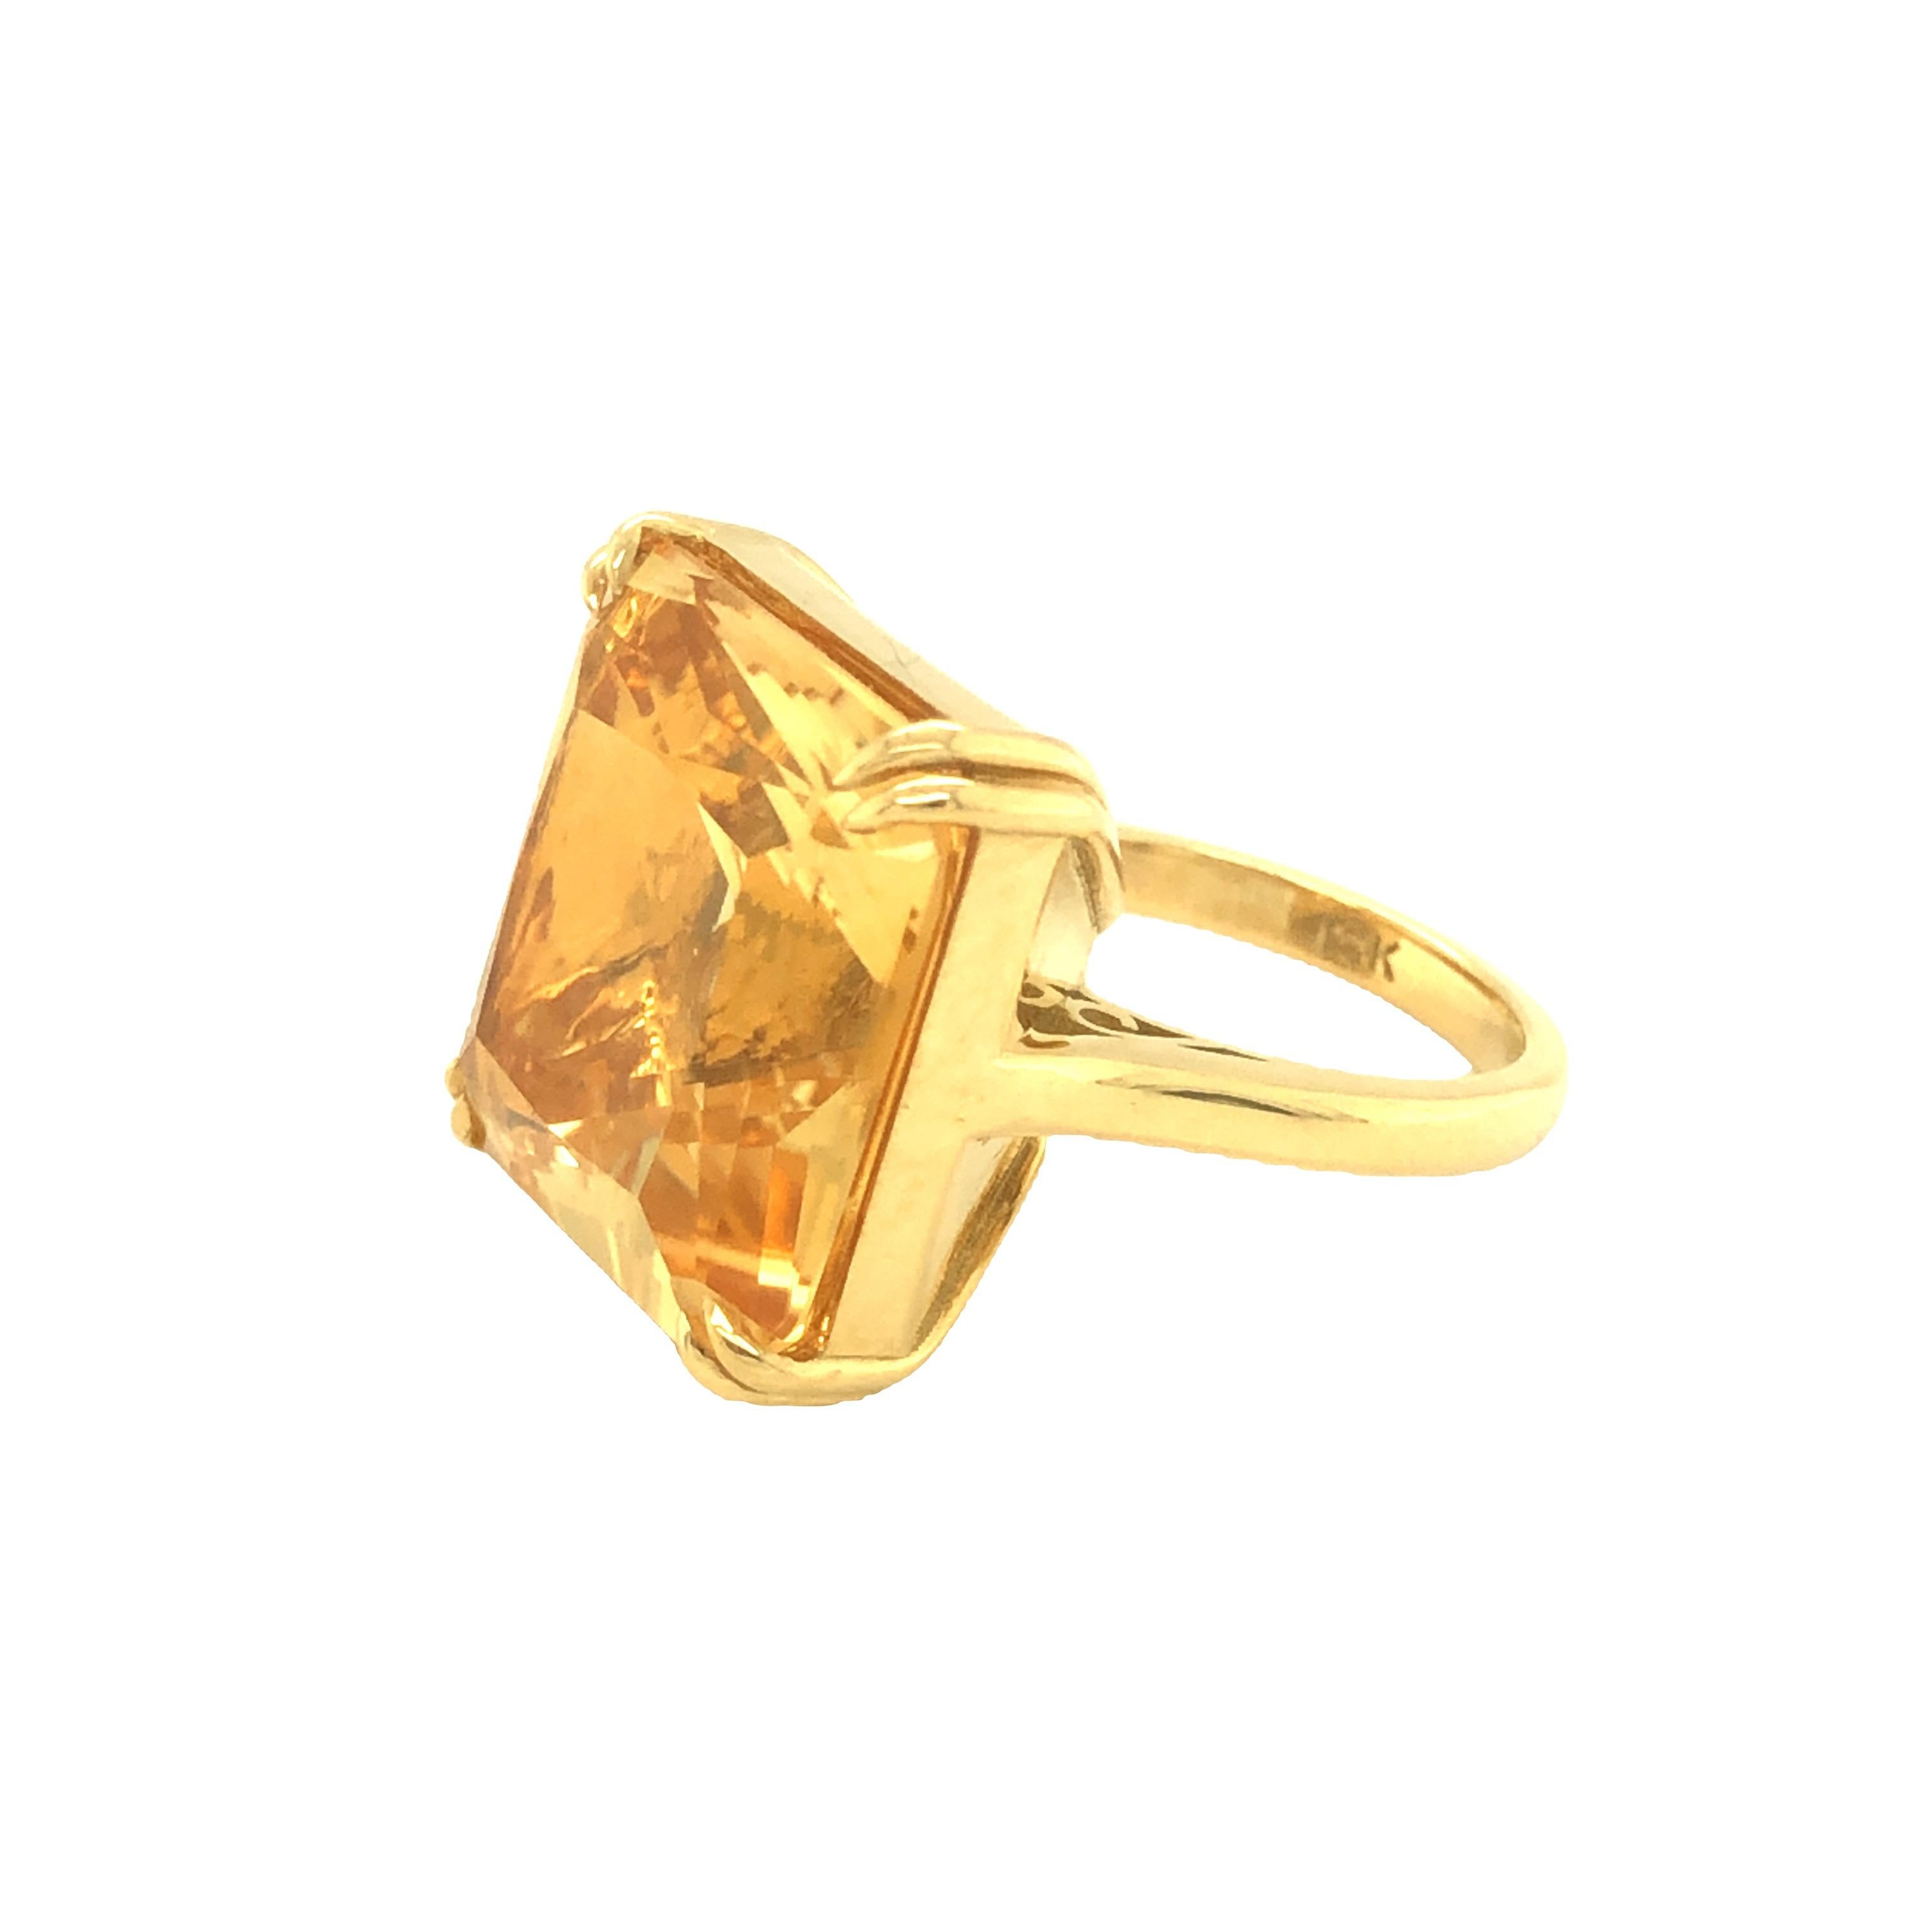 Designed and handcrafted by Gems Are Forever, Inc in Beverly Hills. This gorgeous cocktail ring features a 13 carat square cushion cut citrine. The perfectly golden color citrine measures 16.7 mm x 16.7 mm and set in 8 claw prongs with intricate